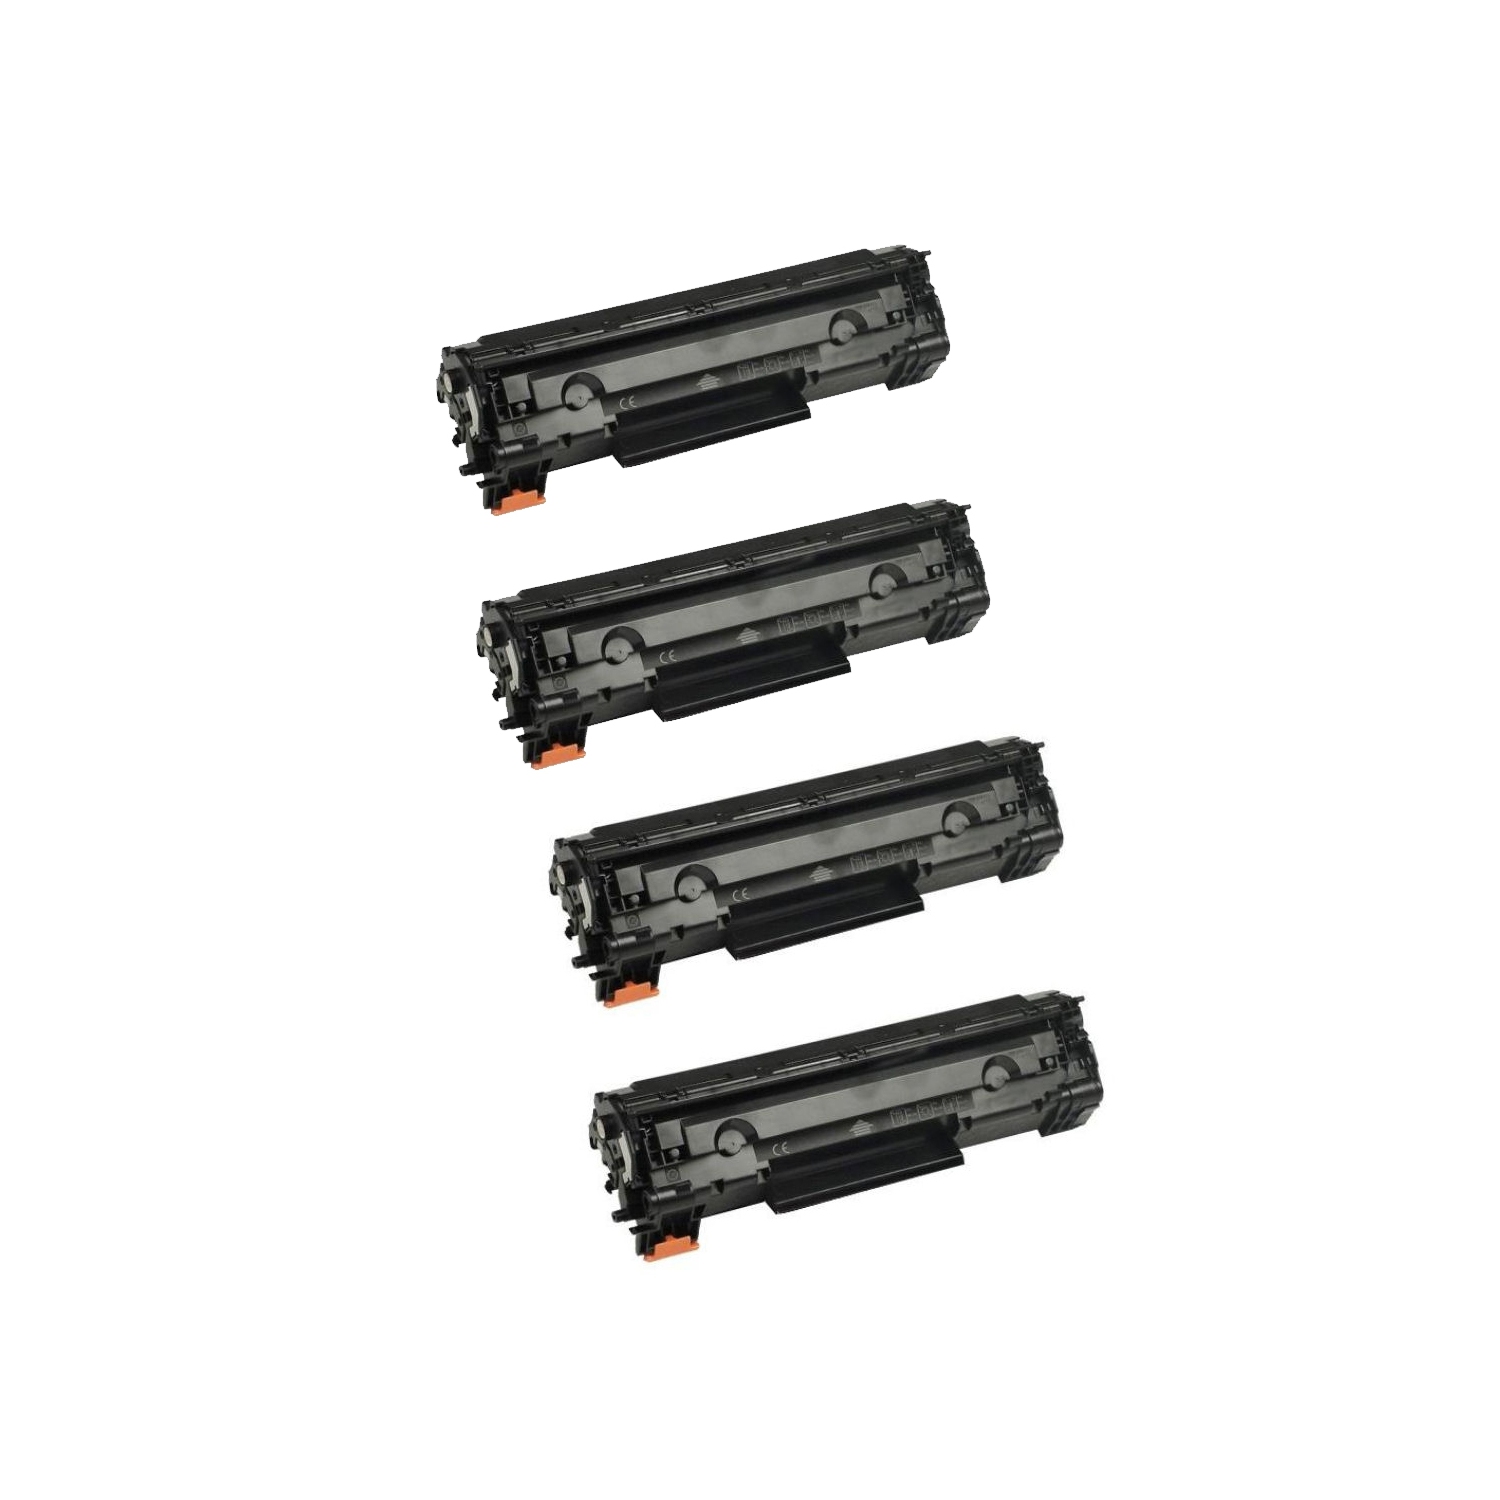 4 Pack CF283A Compatible Toner Cartridges for HP 83A, CF283A LaserJet Pro MFP M127fn, M127fw,M125nw,M125rnw, M225dn, M201dw, M201n